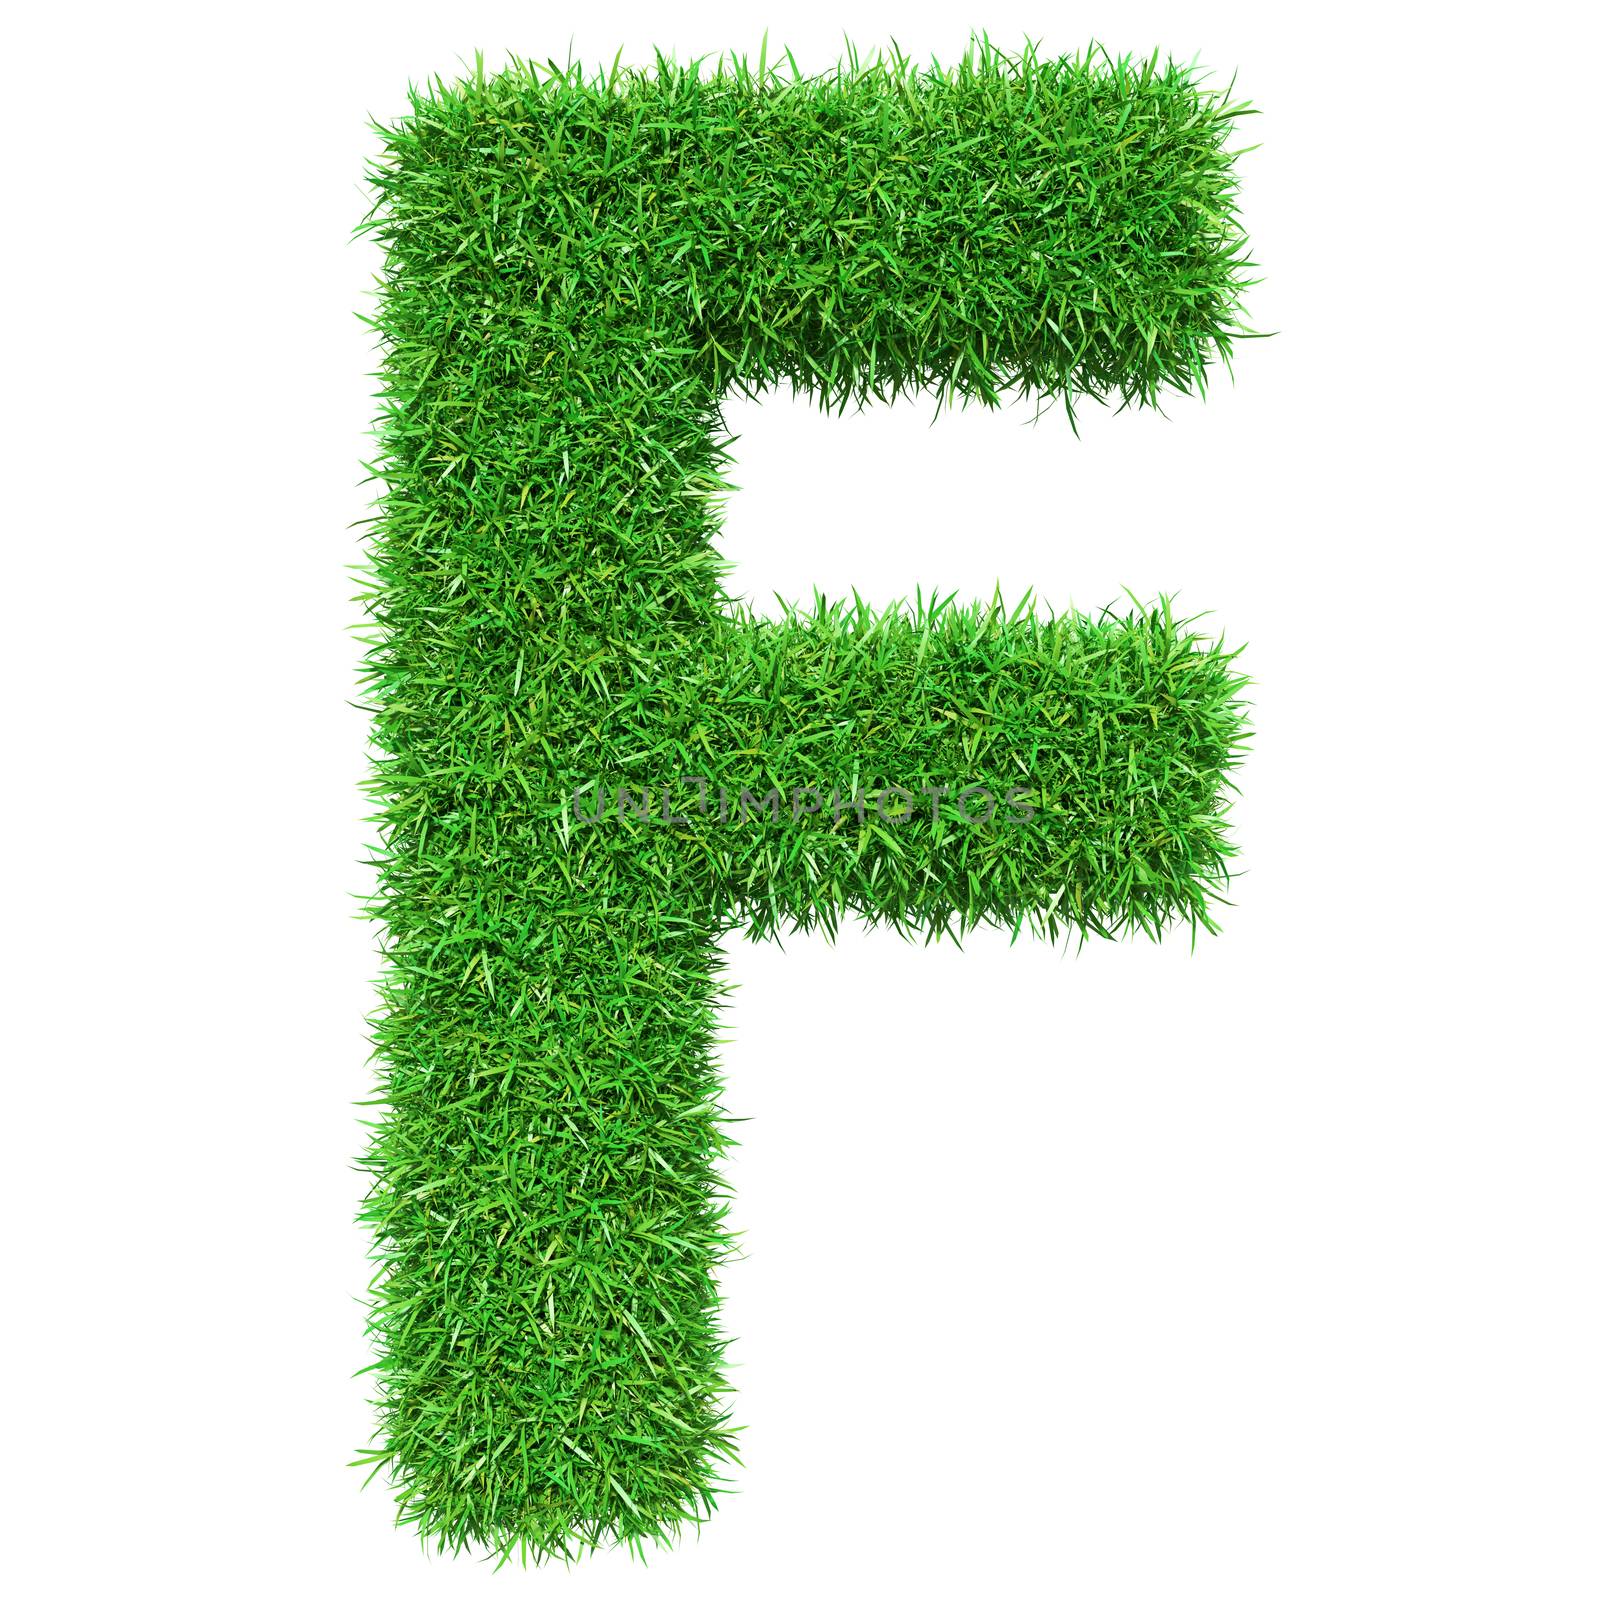 Green Grass Letter F. Isolated On White Background. Font For Your Design. 3D Illustration